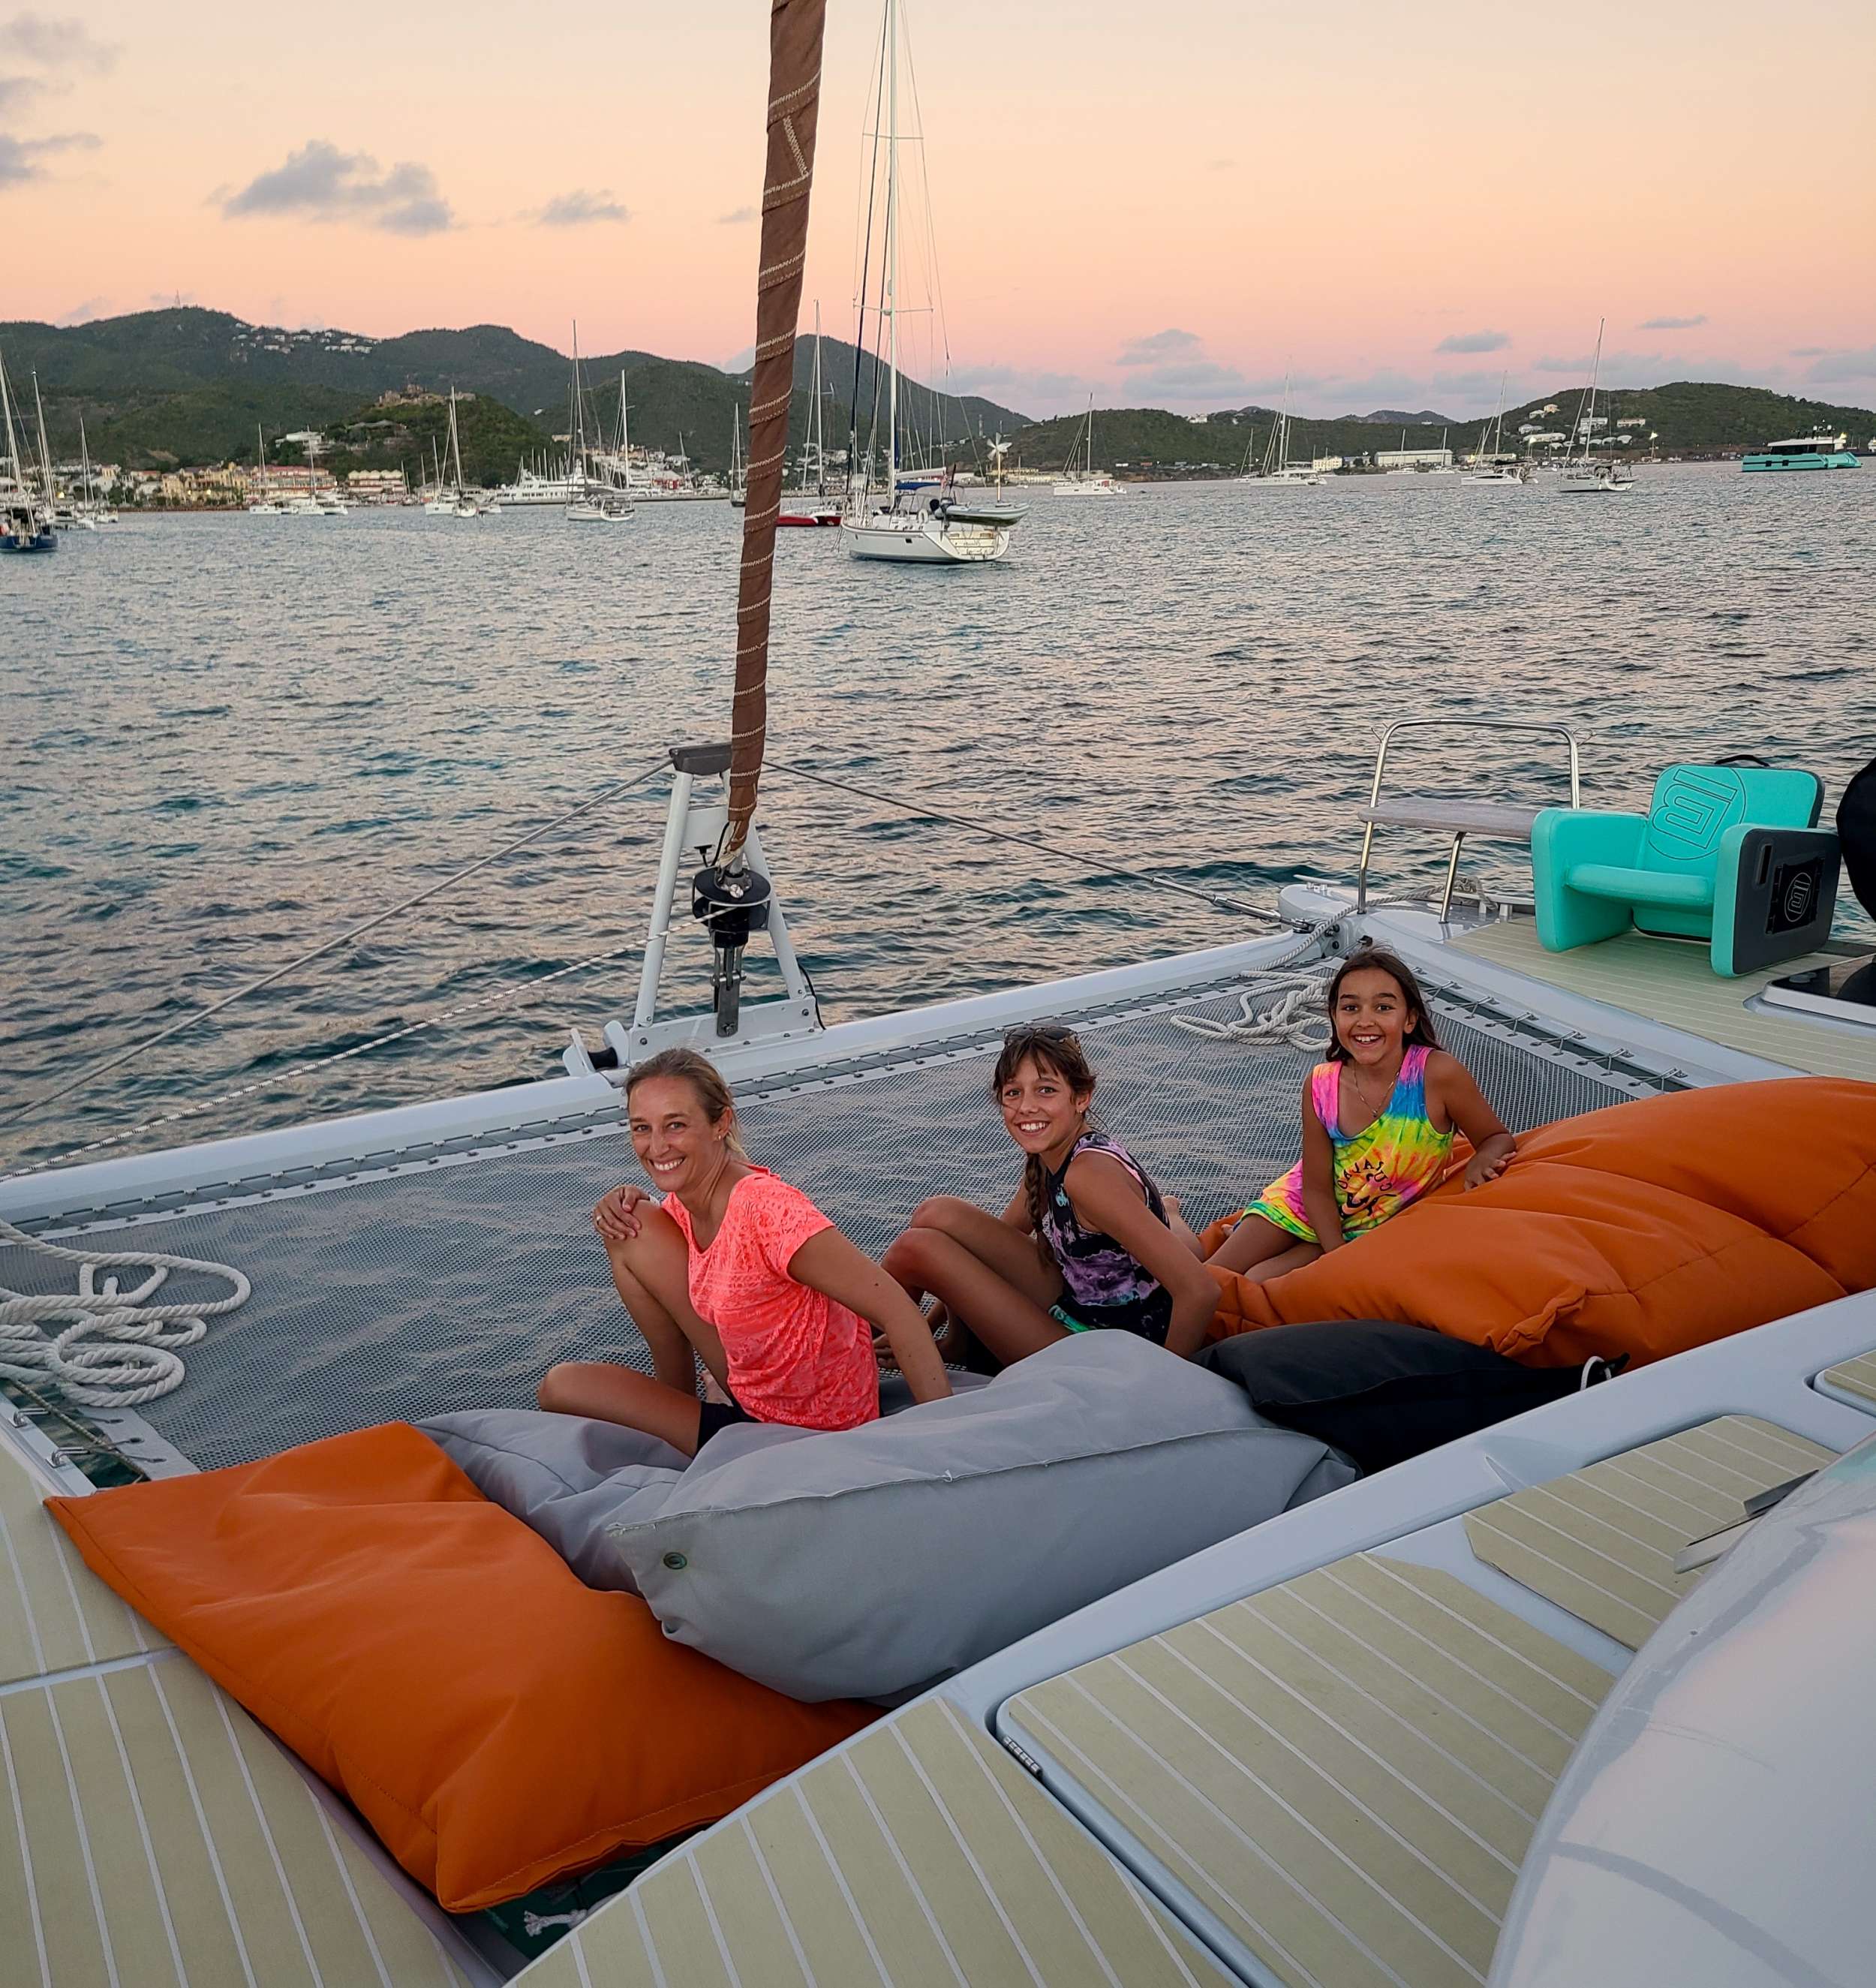 MIMBAW Yacht Charter - The tramps are a favourite place.